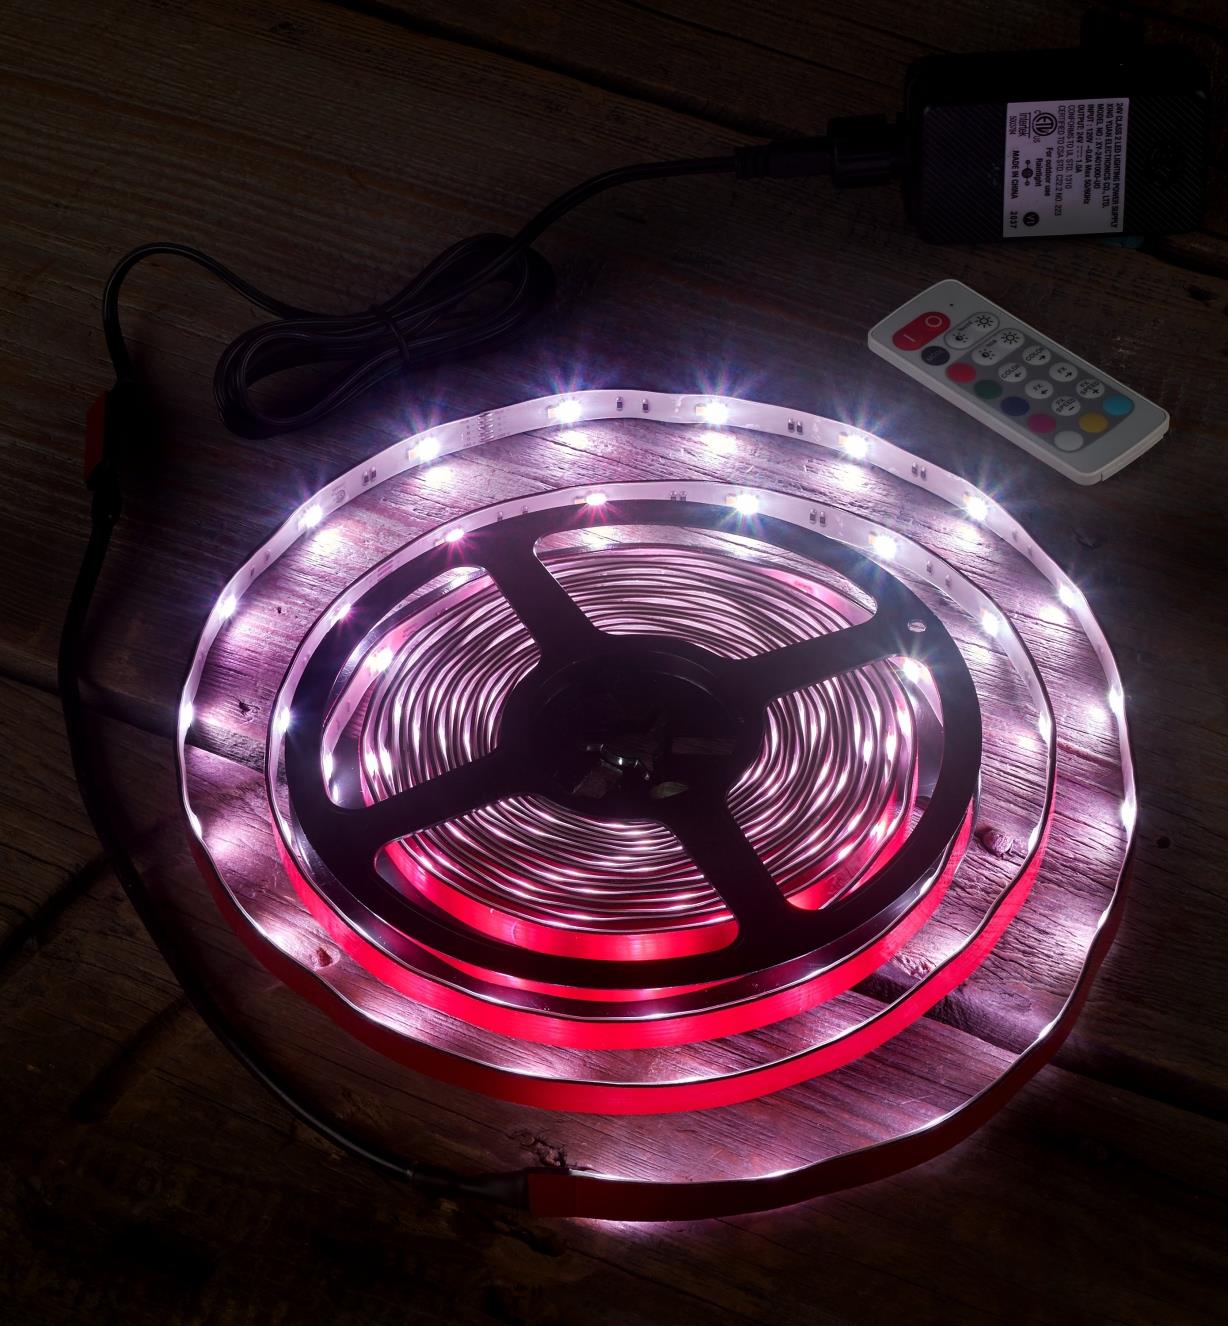 An LED color-controlled tape light kit set to a pale pink-purple hue to test it before installation